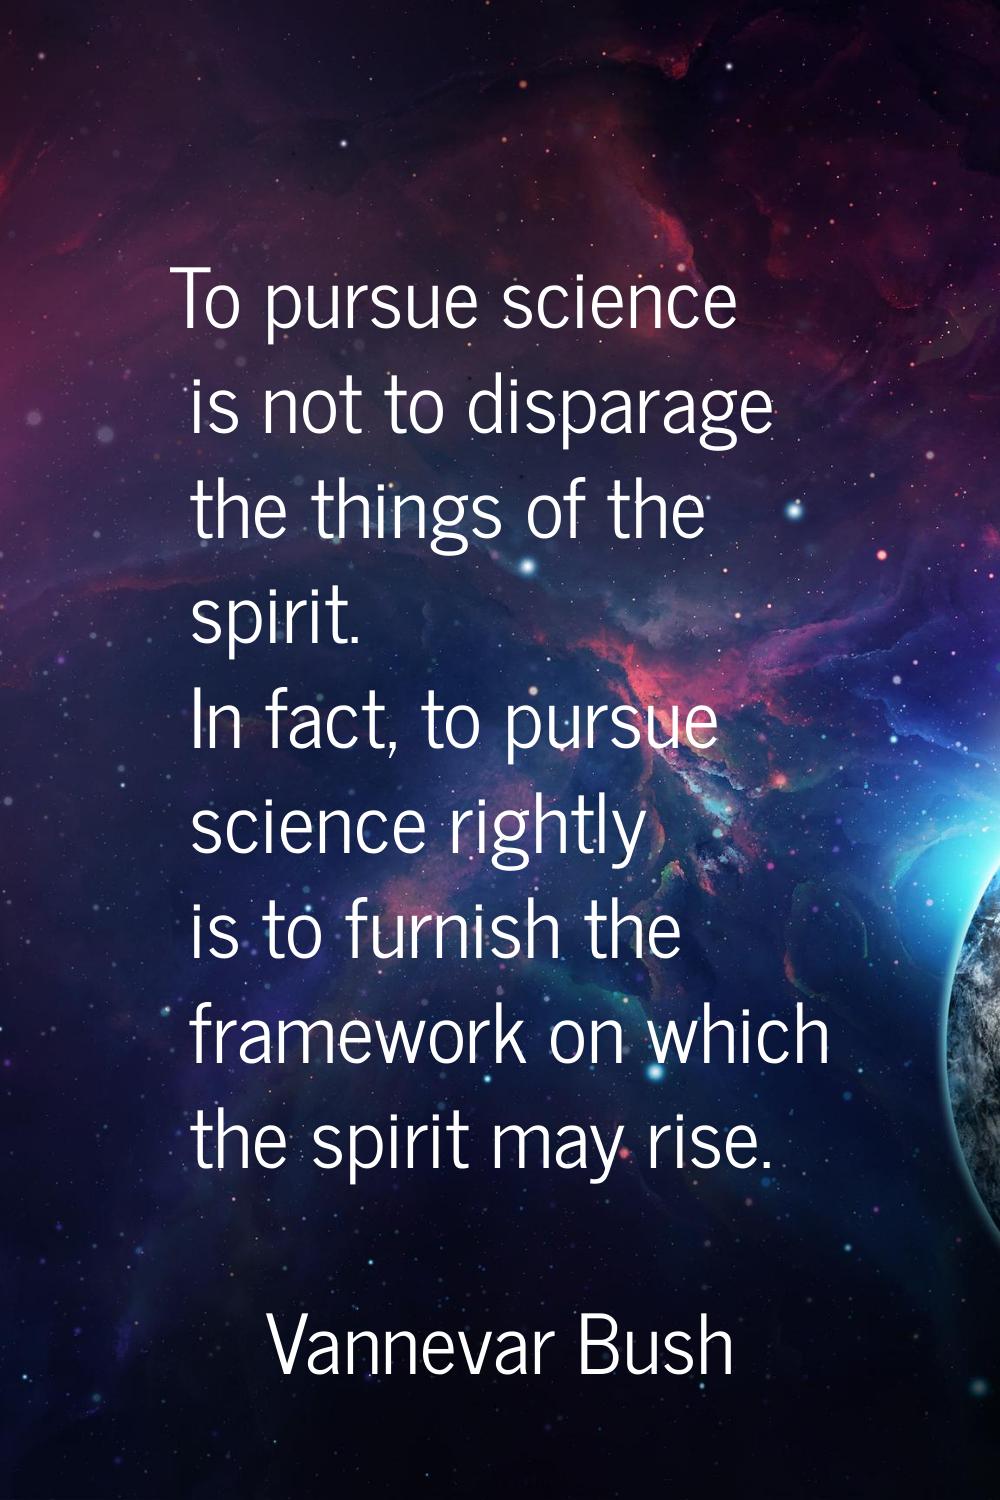 To pursue science is not to disparage the things of the spirit. In fact, to pursue science rightly 